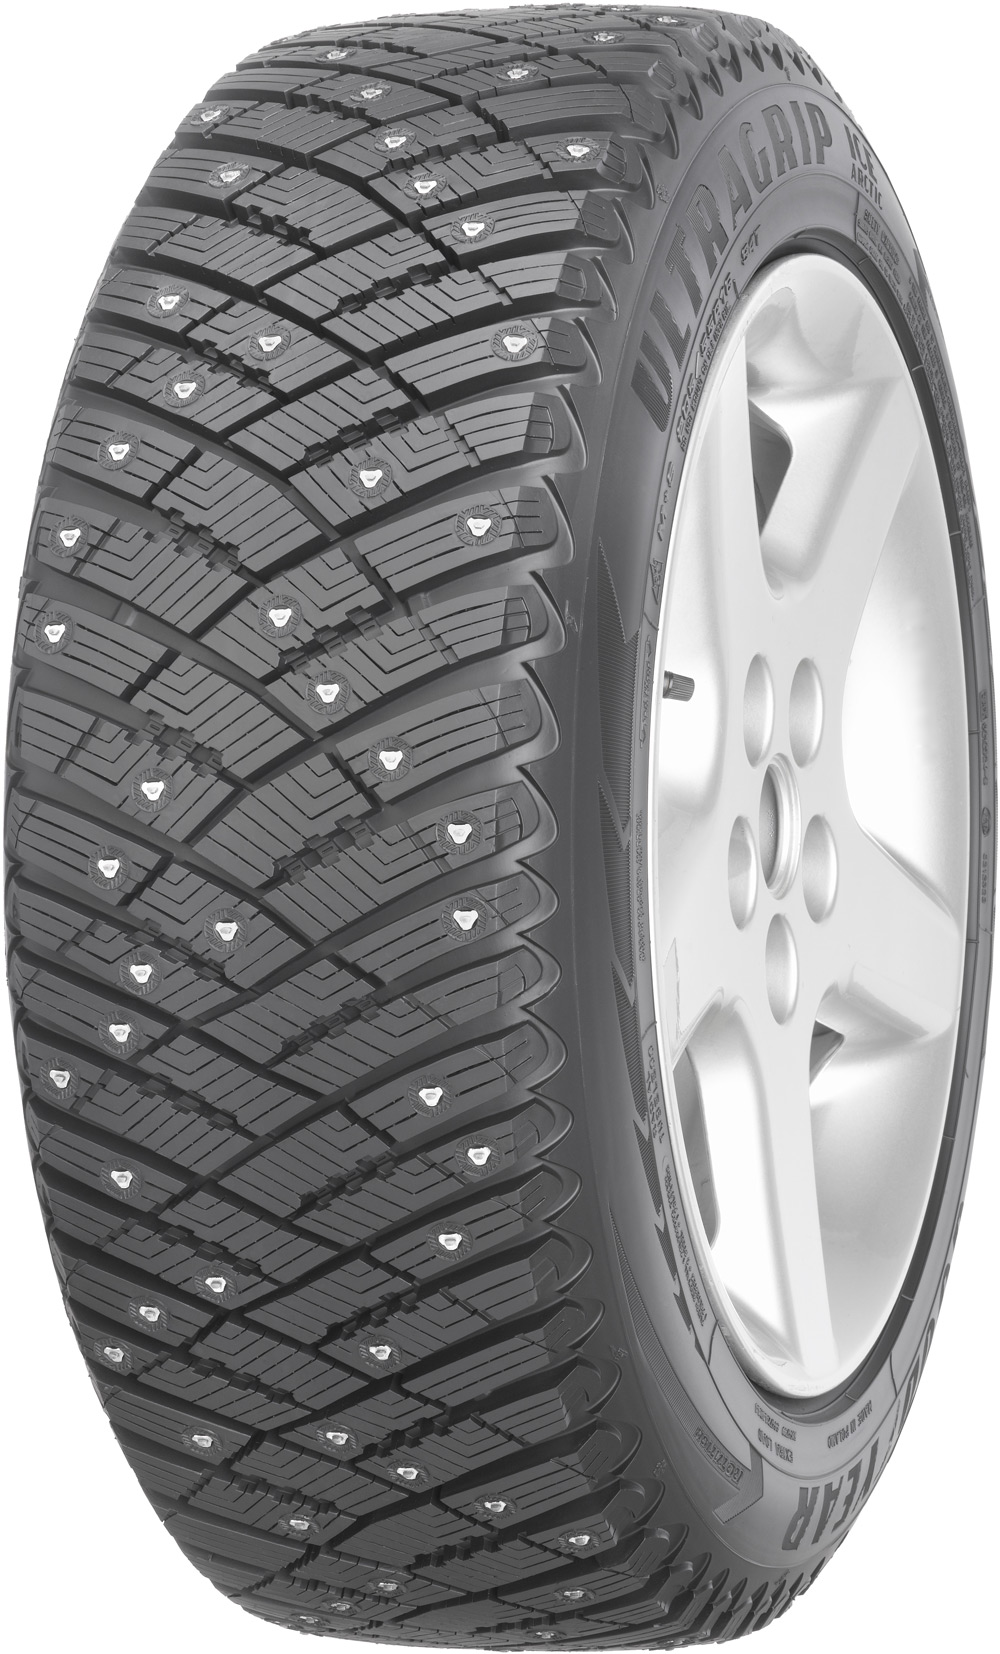 Anvelope auto GOODYEAR Ultra Grip Ice Arctic XL 175/65 R15 88T